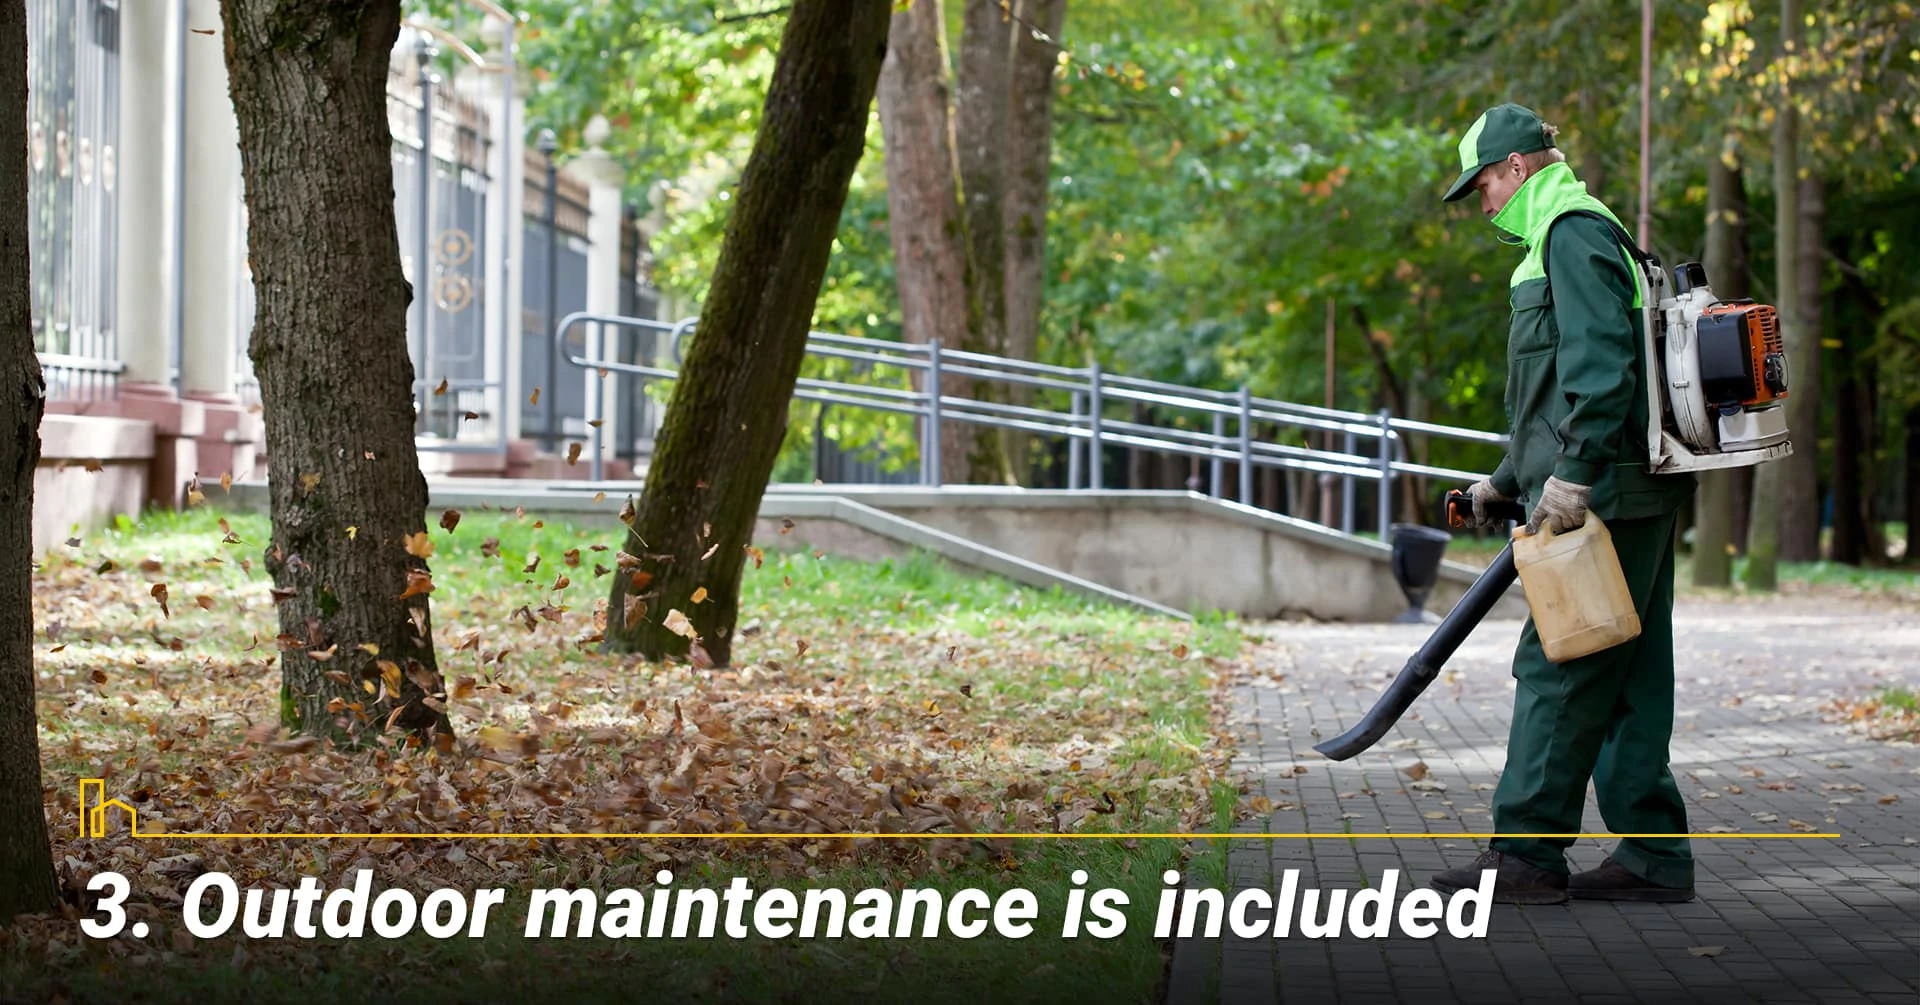 Outdoor maintenance is included, no need to worry about yard work